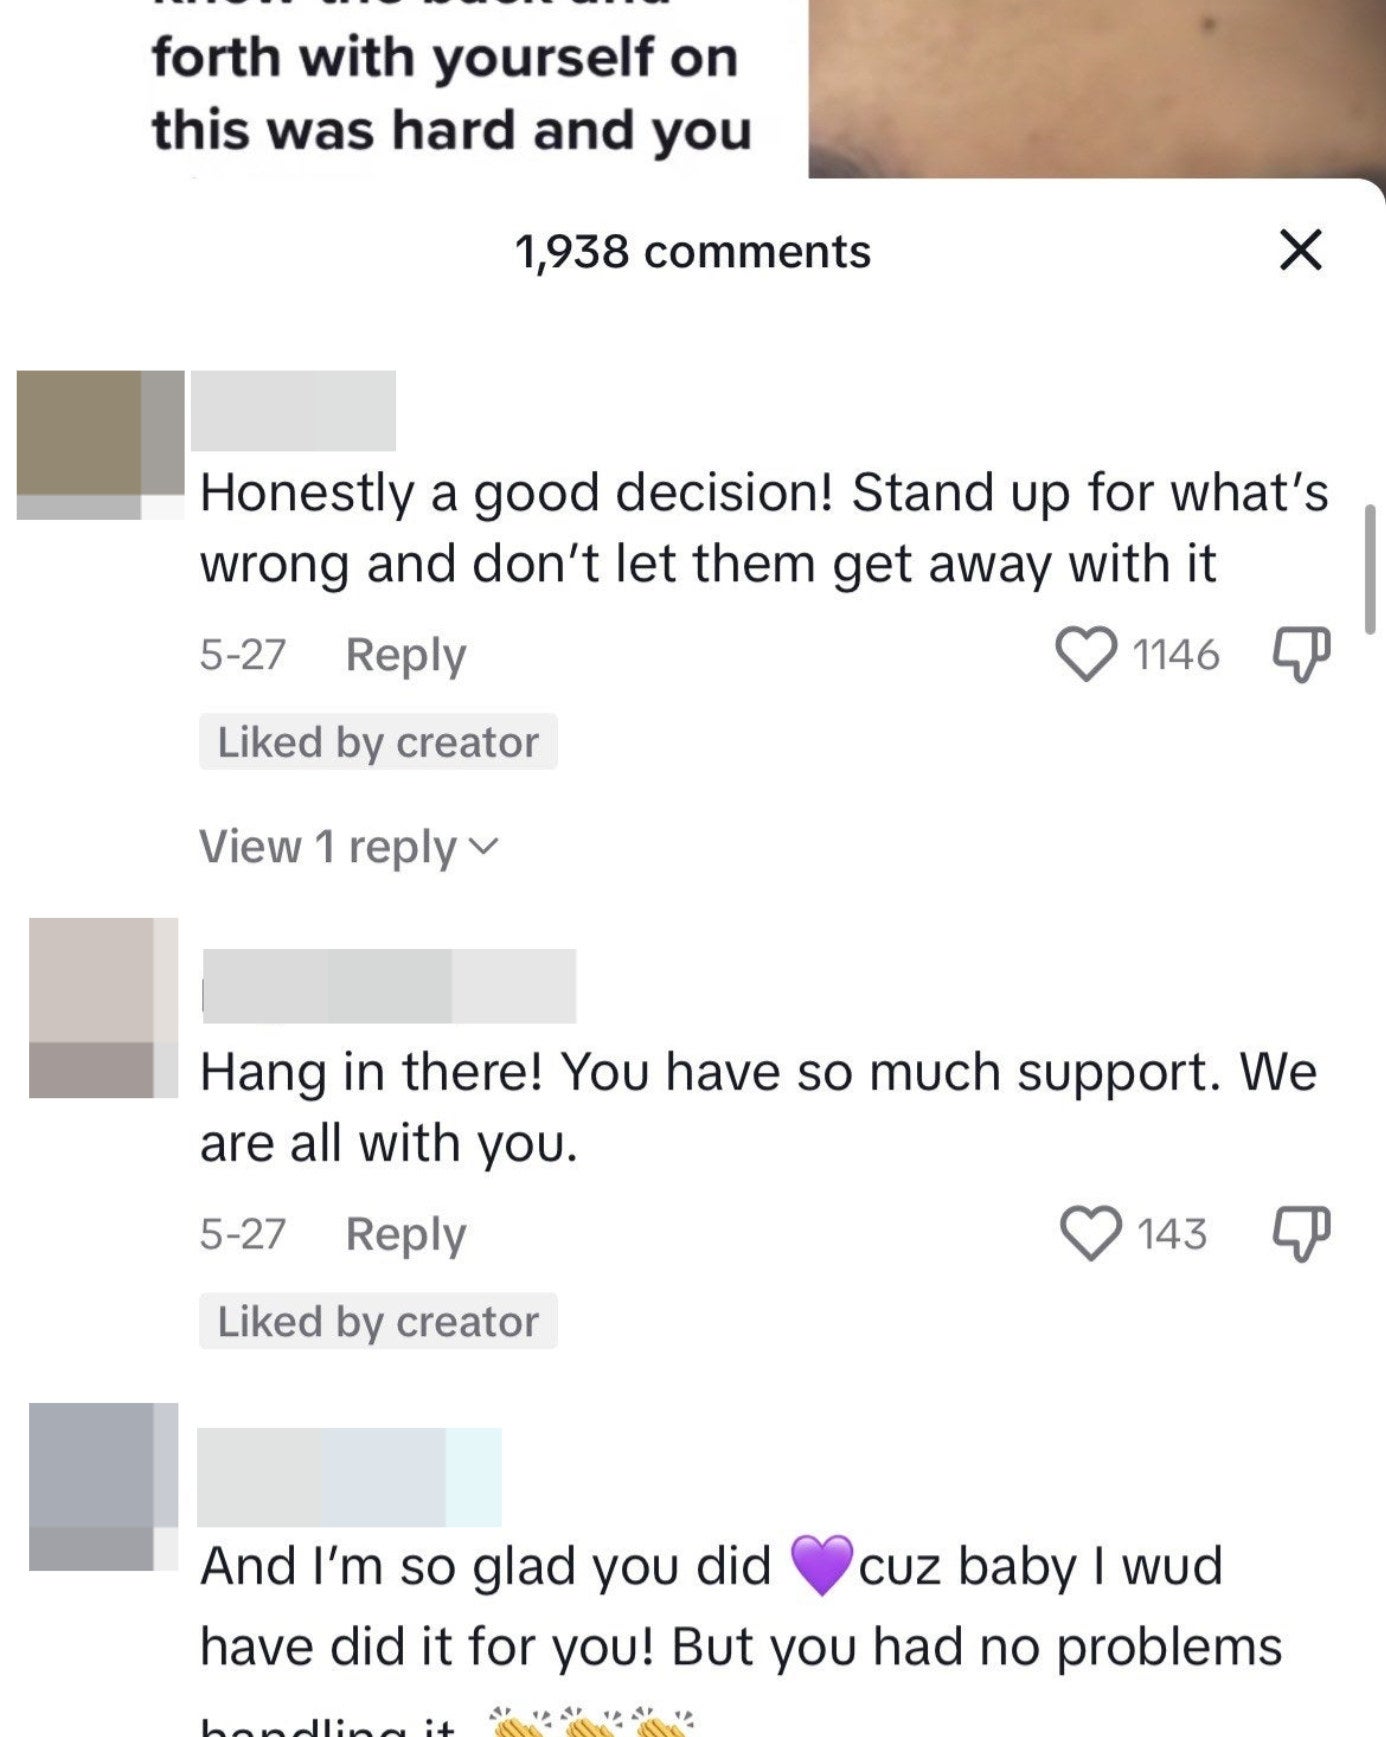 Encouraging TikTok comments, including &quot;Honestly a good decision!&quot; and &quot;Hang in there! You have so much support; we are all with you&quot;